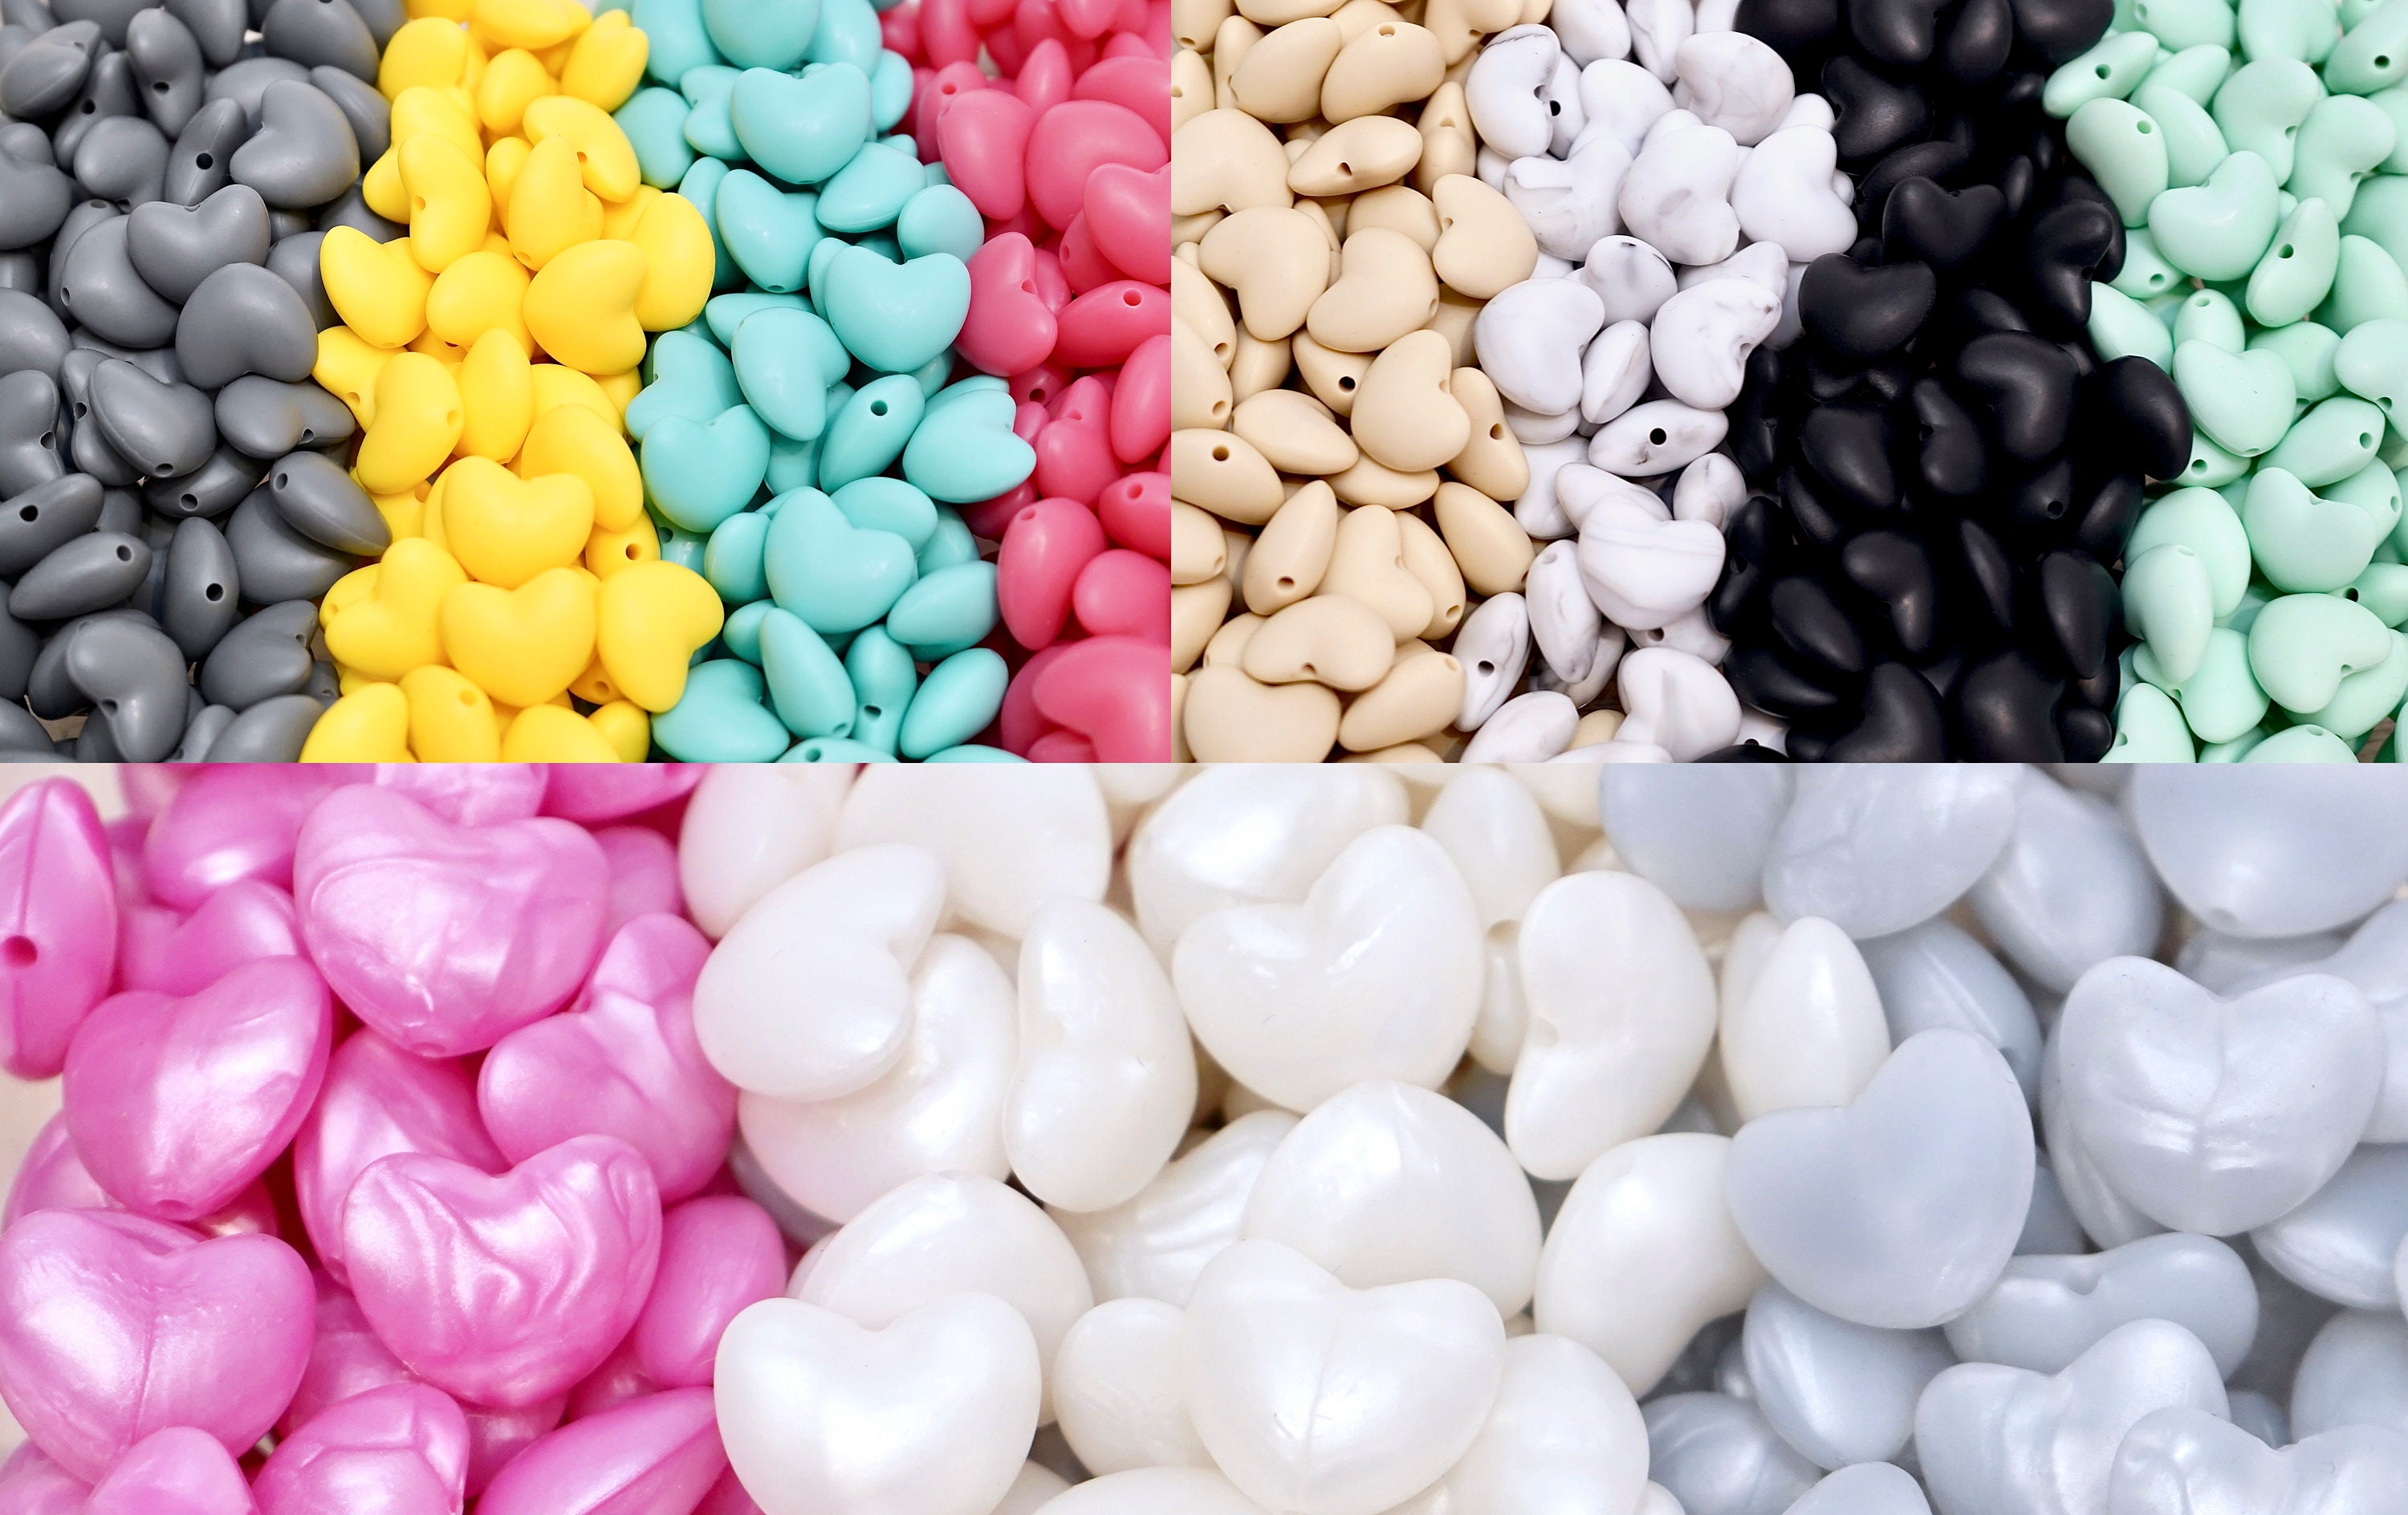 Mixed Color Heart CC Silicone Focal Beads